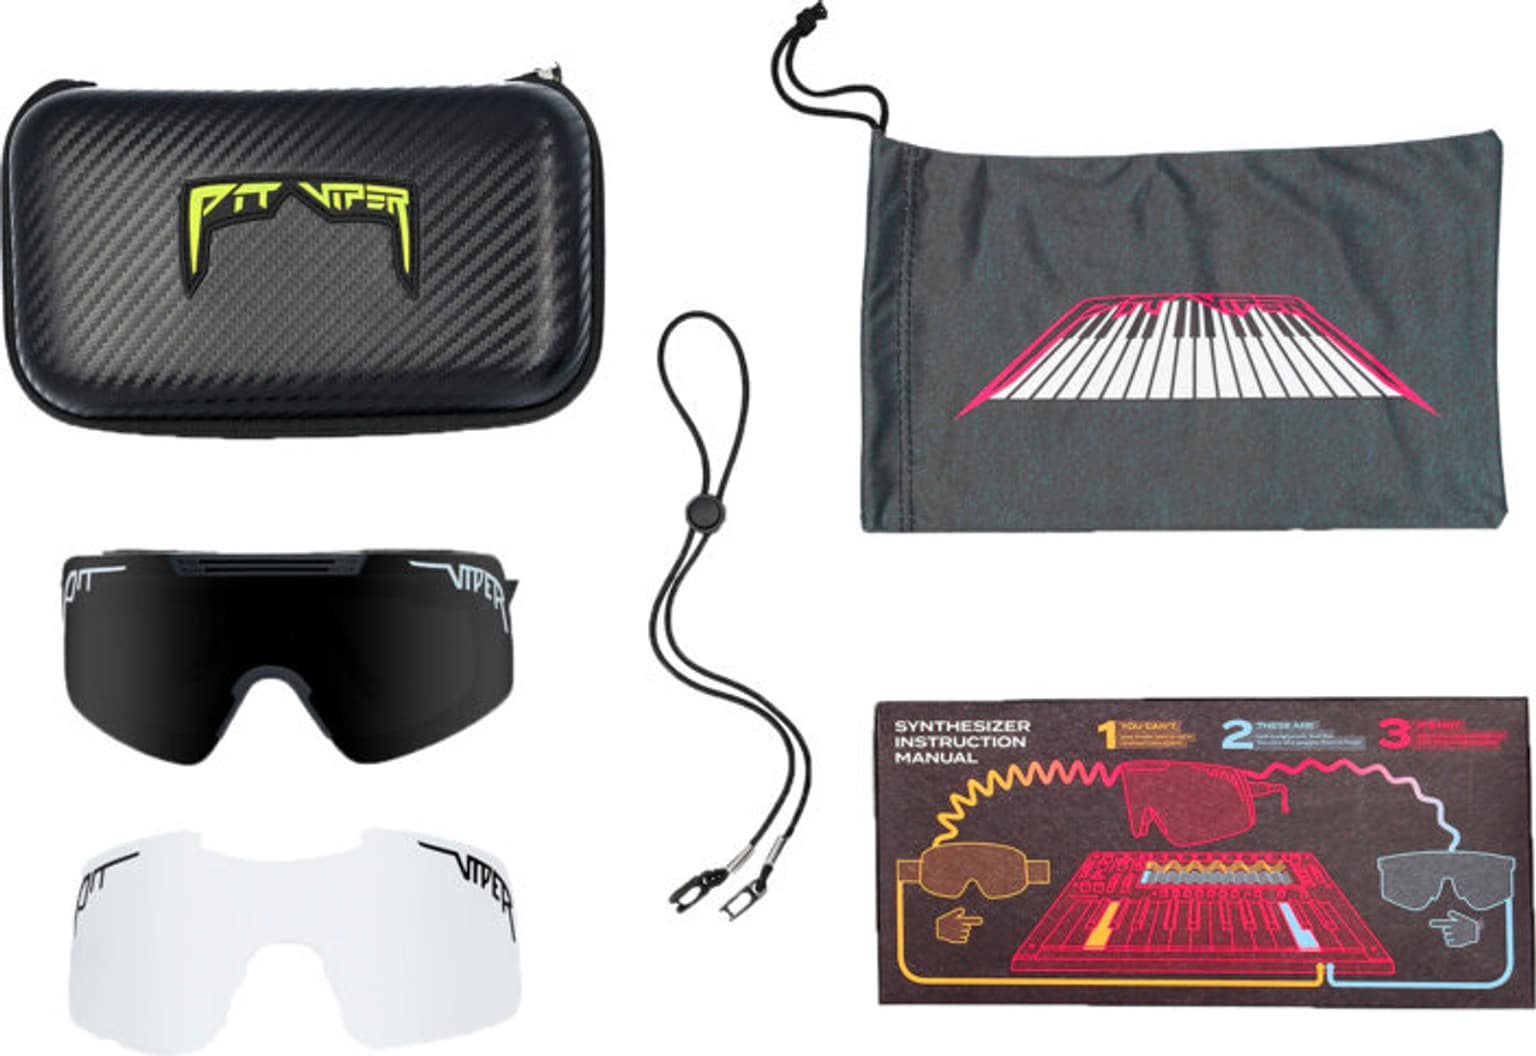 Pit Viper Pit Viper The Synthesizer The Standard Lunettes de sport 3